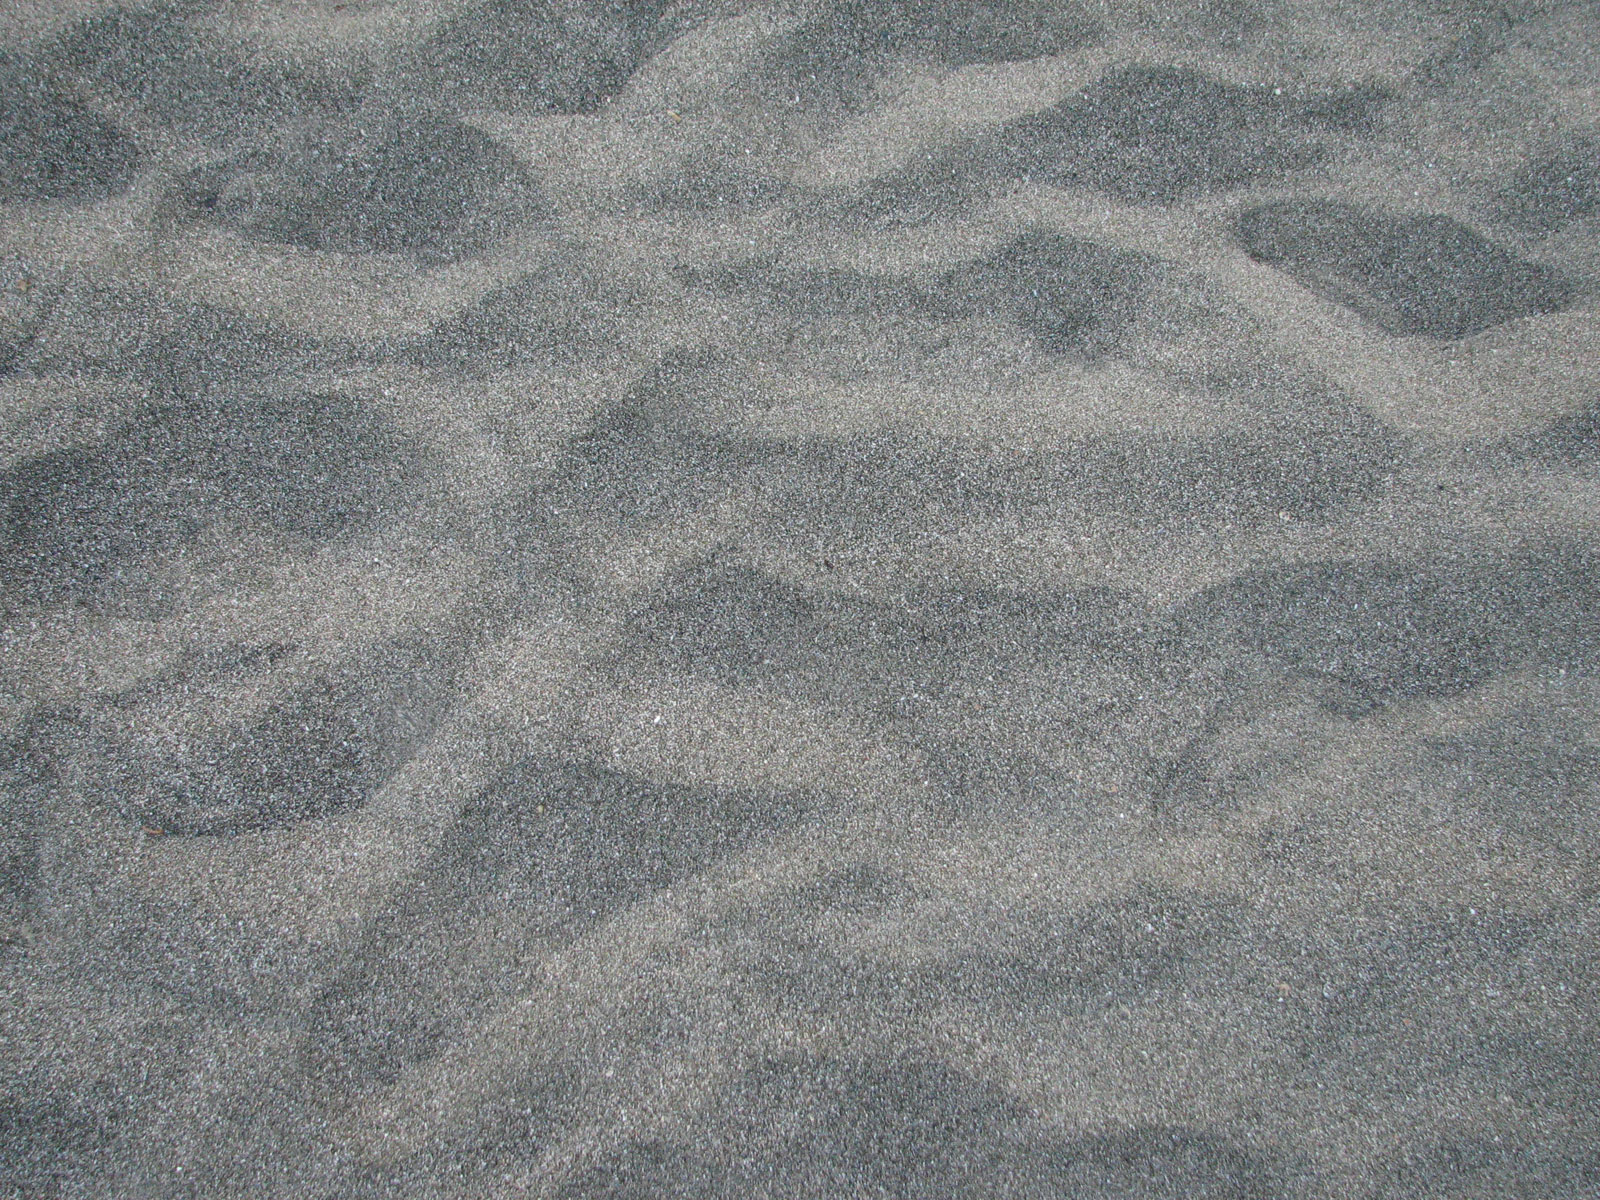 Sand-12 for 1600 x 1200 resolution